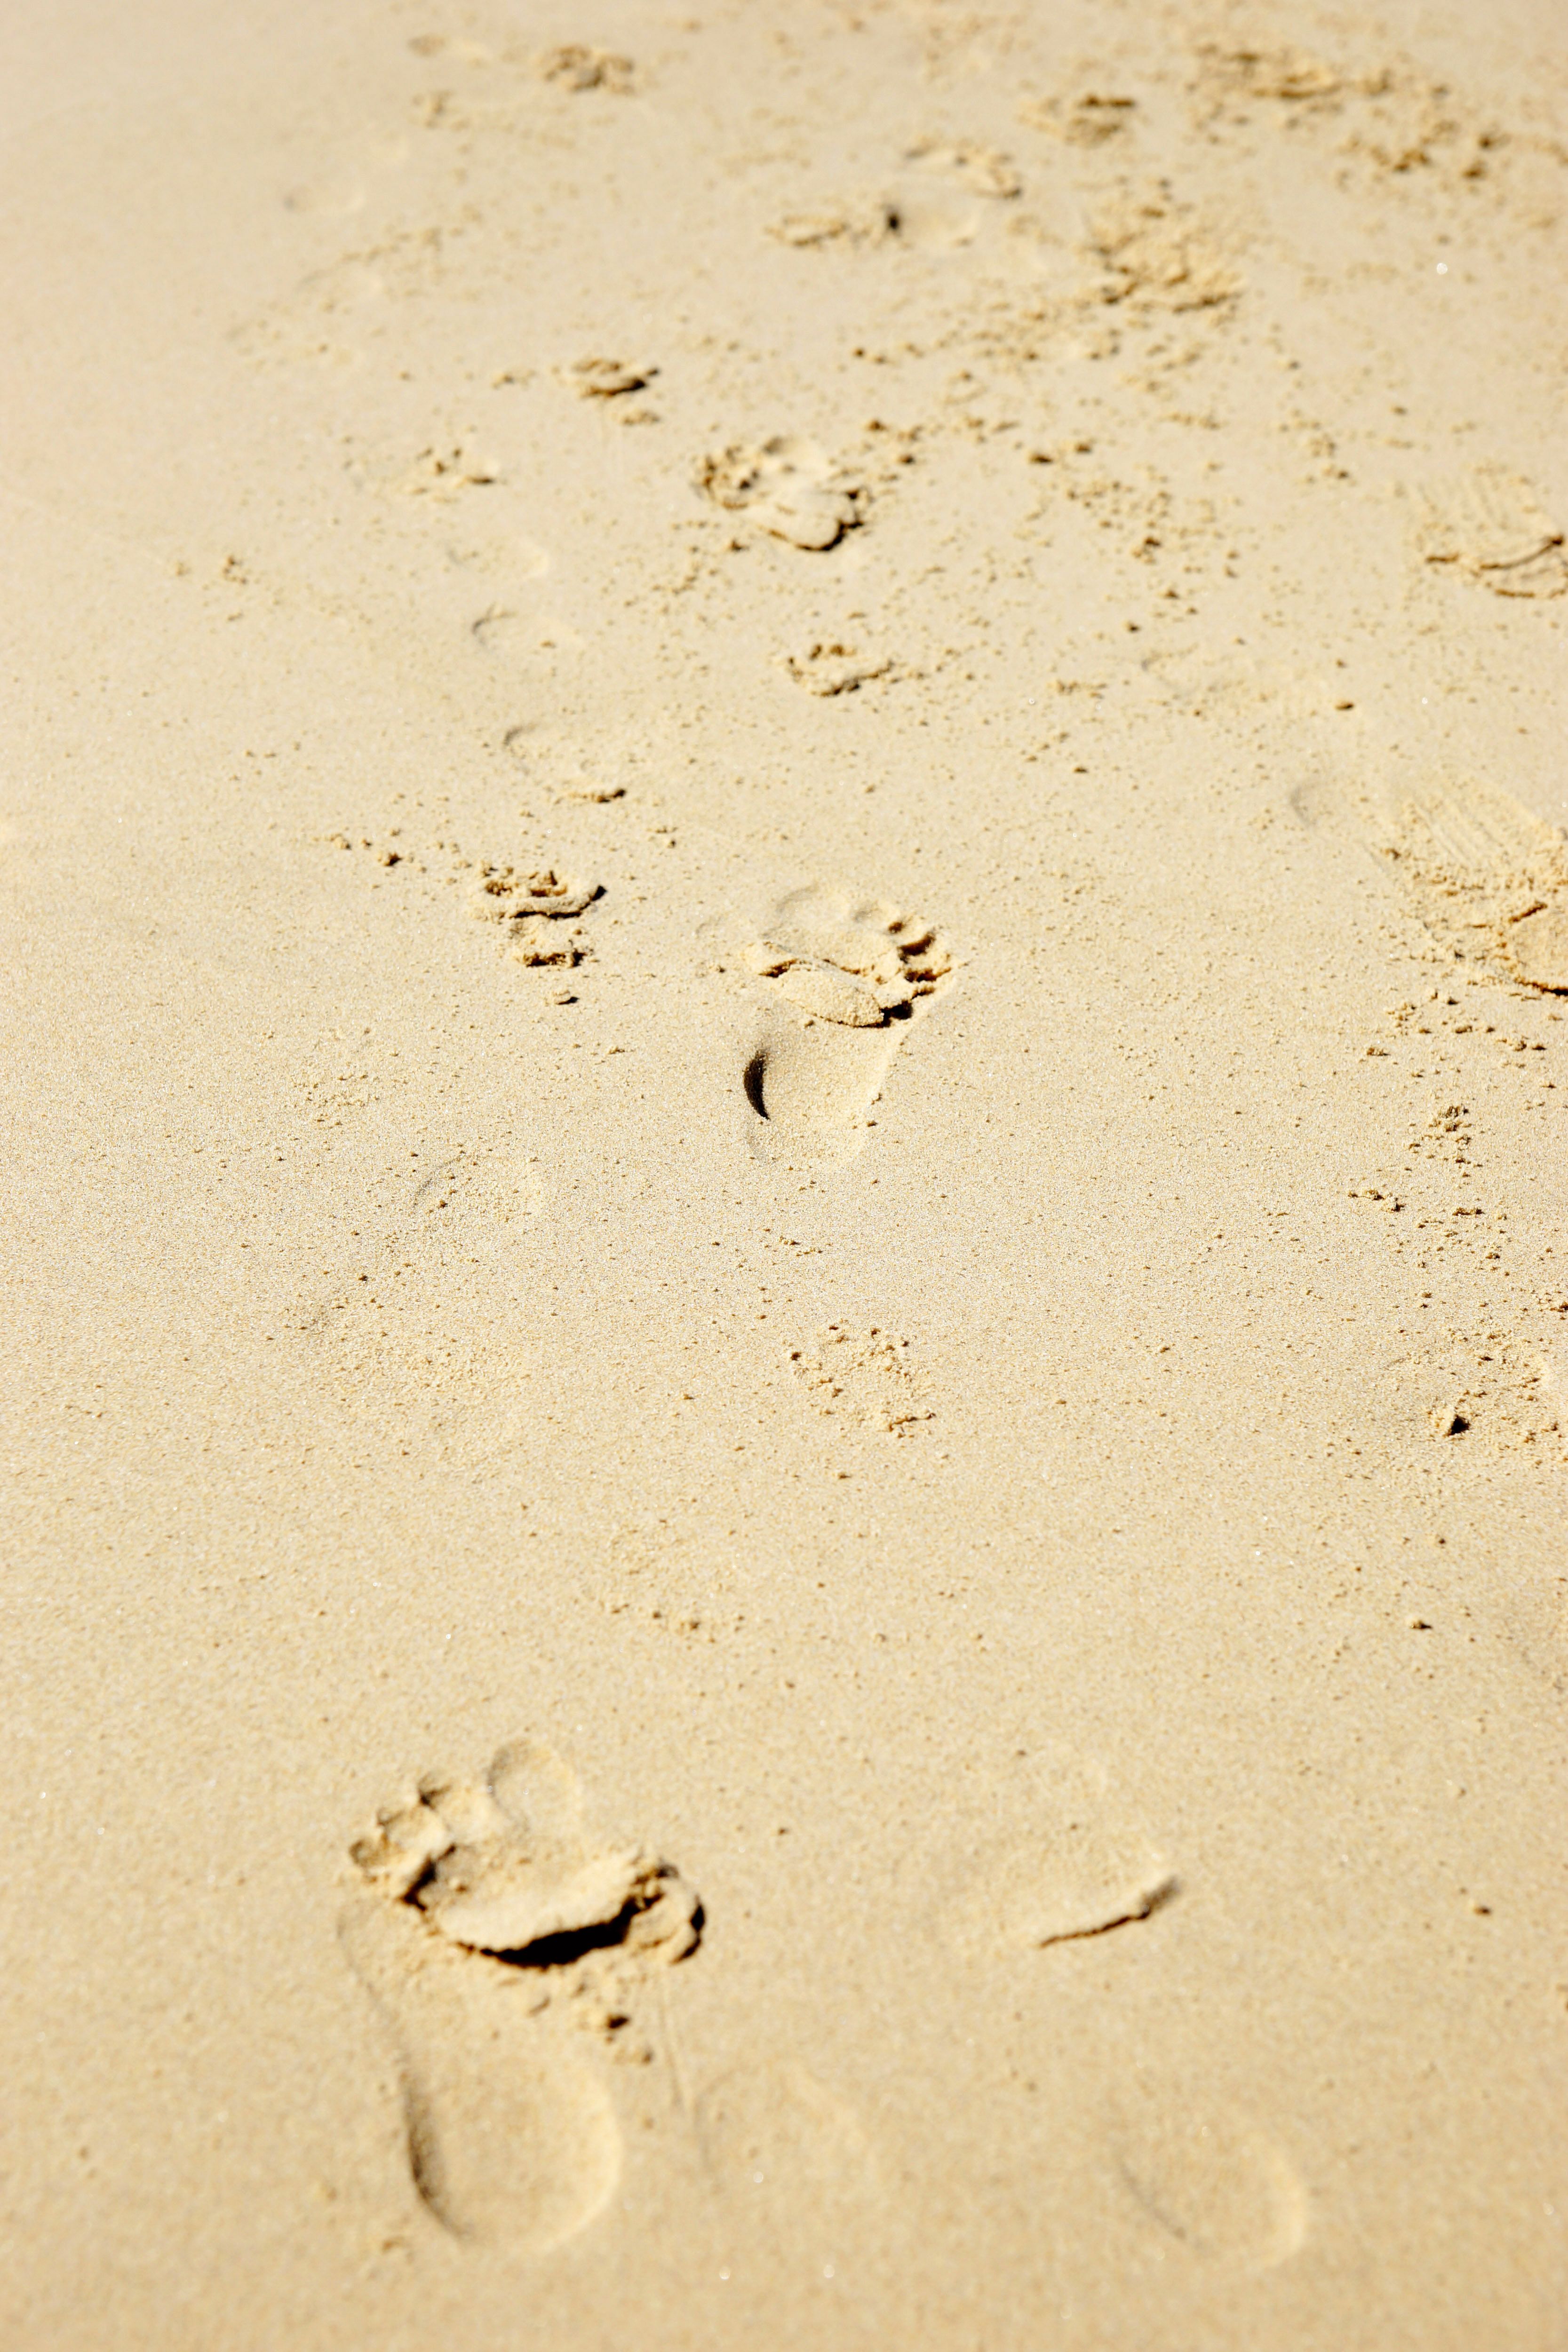 Two more background photo of footprints in the sand